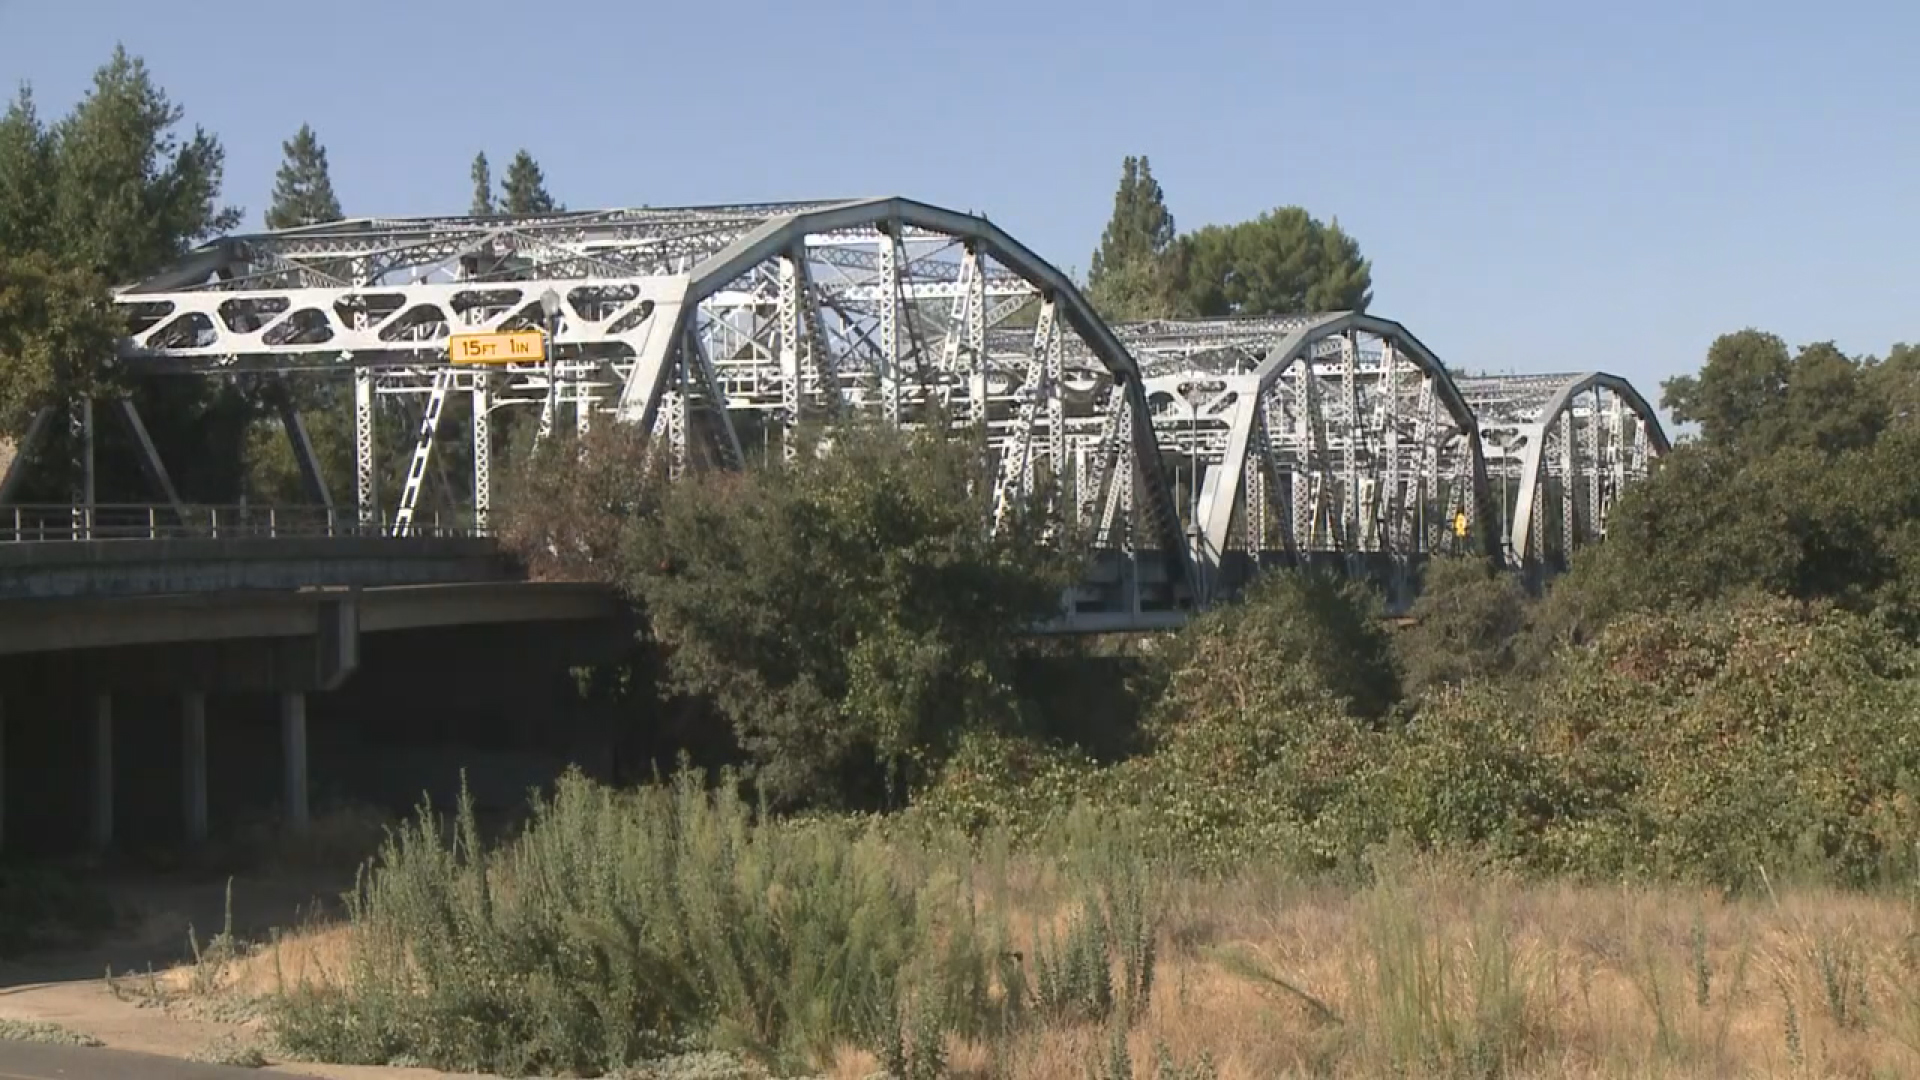 "Why hasn't the I Street/Fair Oaks bridge by Sac State been painted? It's been ugly silver primer for decades" Wait, what? another question about a bridge?